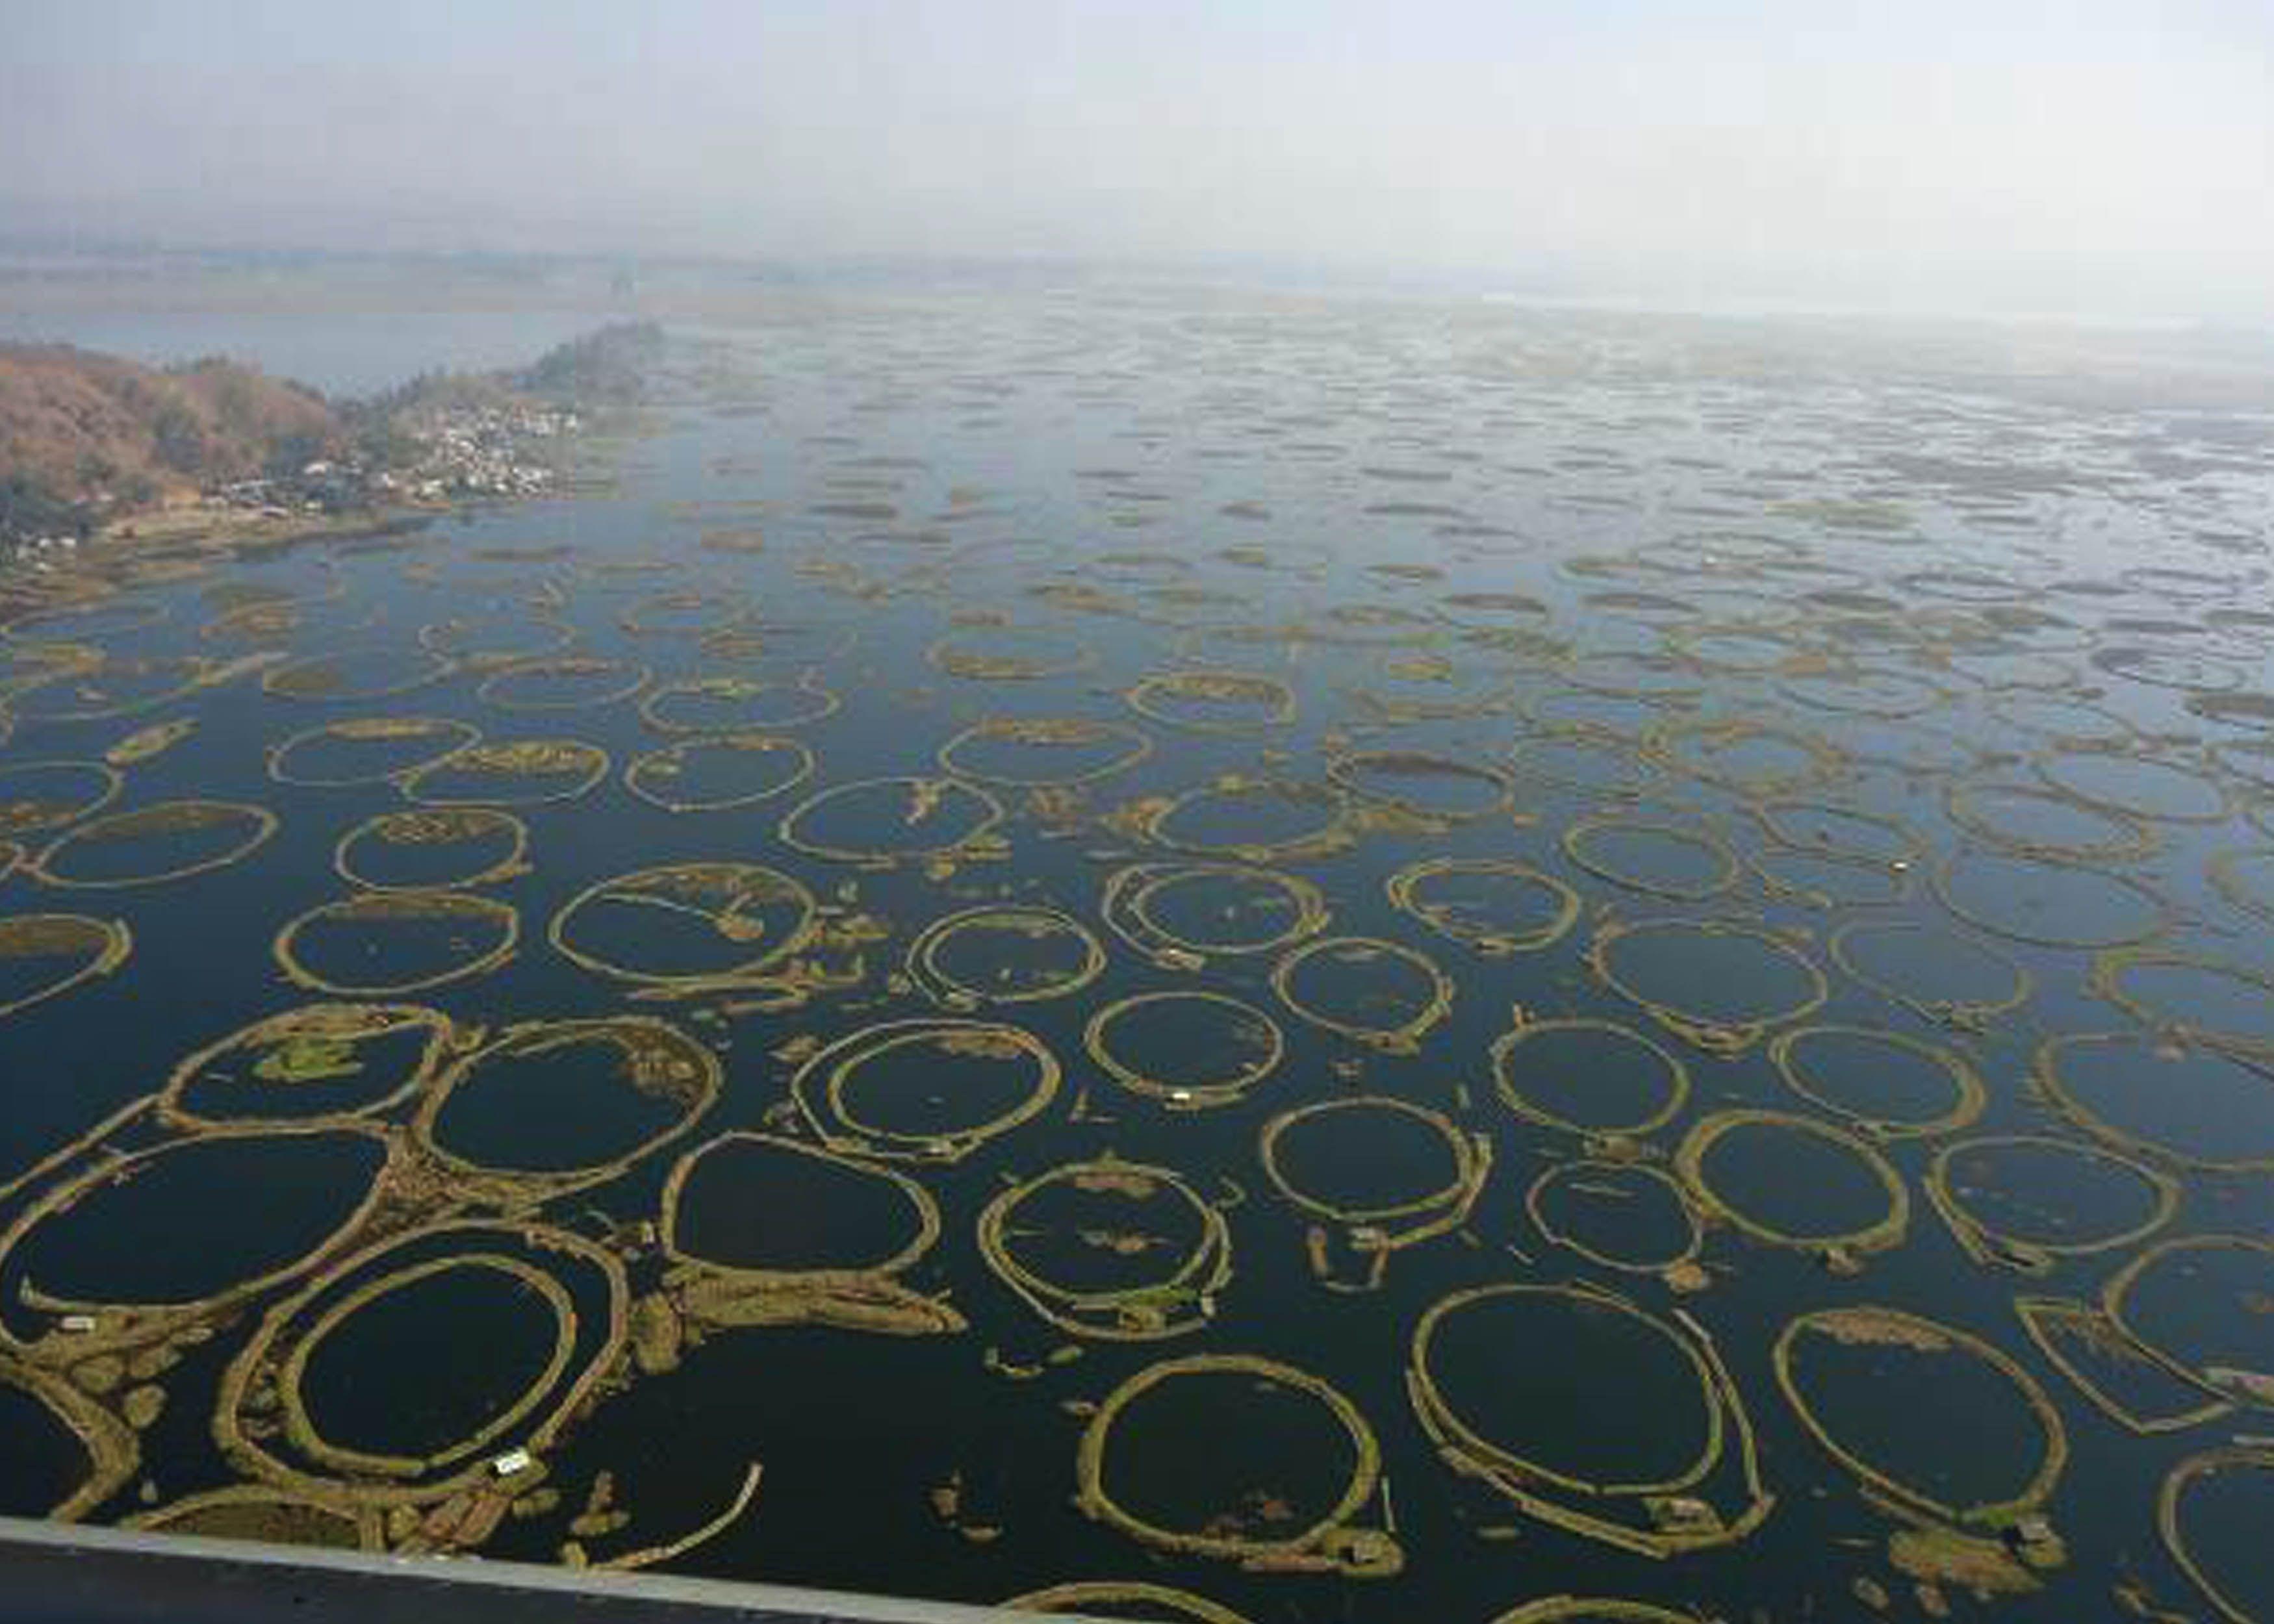 Loktak lake the only Floating lake in the world from Manipur state